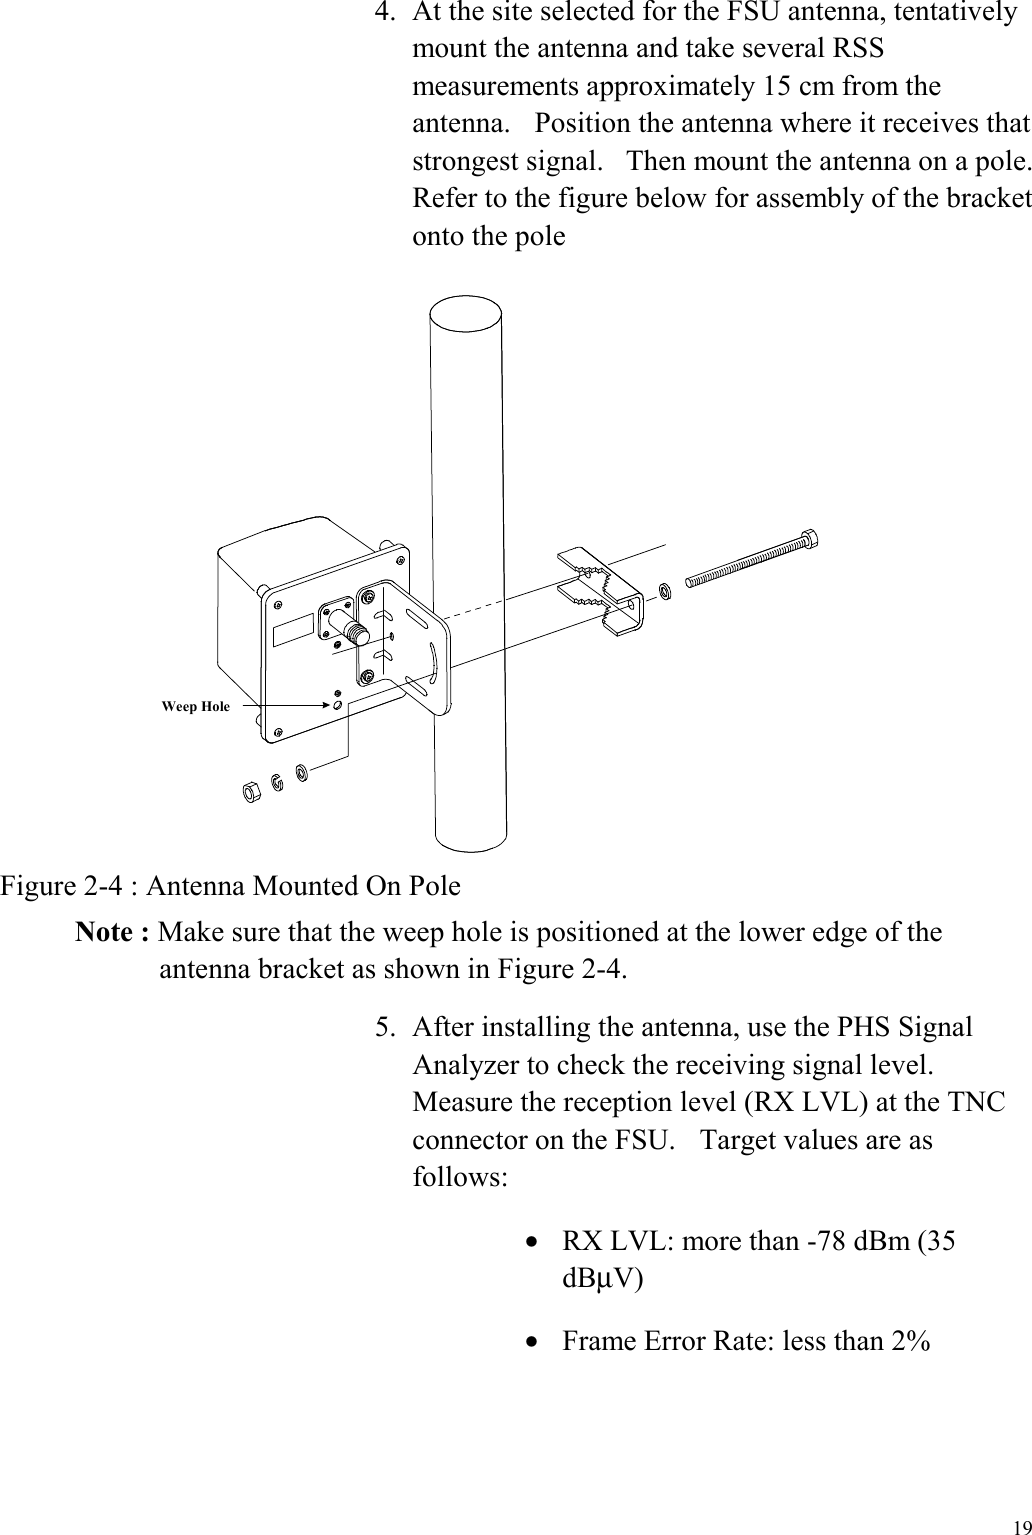  19 4.  At the site selected for the FSU antenna, tentatively mount the antenna and take several RSS measurements approximately 15 cm from the antenna.    Position the antenna where it receives that strongest signal.    Then mount the antenna on a pole.   Refer to the figure below for assembly of the bracket onto the pole Weep Hole Figure 2-4 : Antenna Mounted On Pole Note : Make sure that the weep hole is positioned at the lower edge of the antenna bracket as shown in Figure 2-4. 5.  After installing the antenna, use the PHS Signal Analyzer to check the receiving signal level.   Measure the reception level (RX LVL) at the TNC connector on the FSU.    Target values are as follows: •  RX LVL: more than -78 dBm (35 dBµV) •  Frame Error Rate: less than 2% 